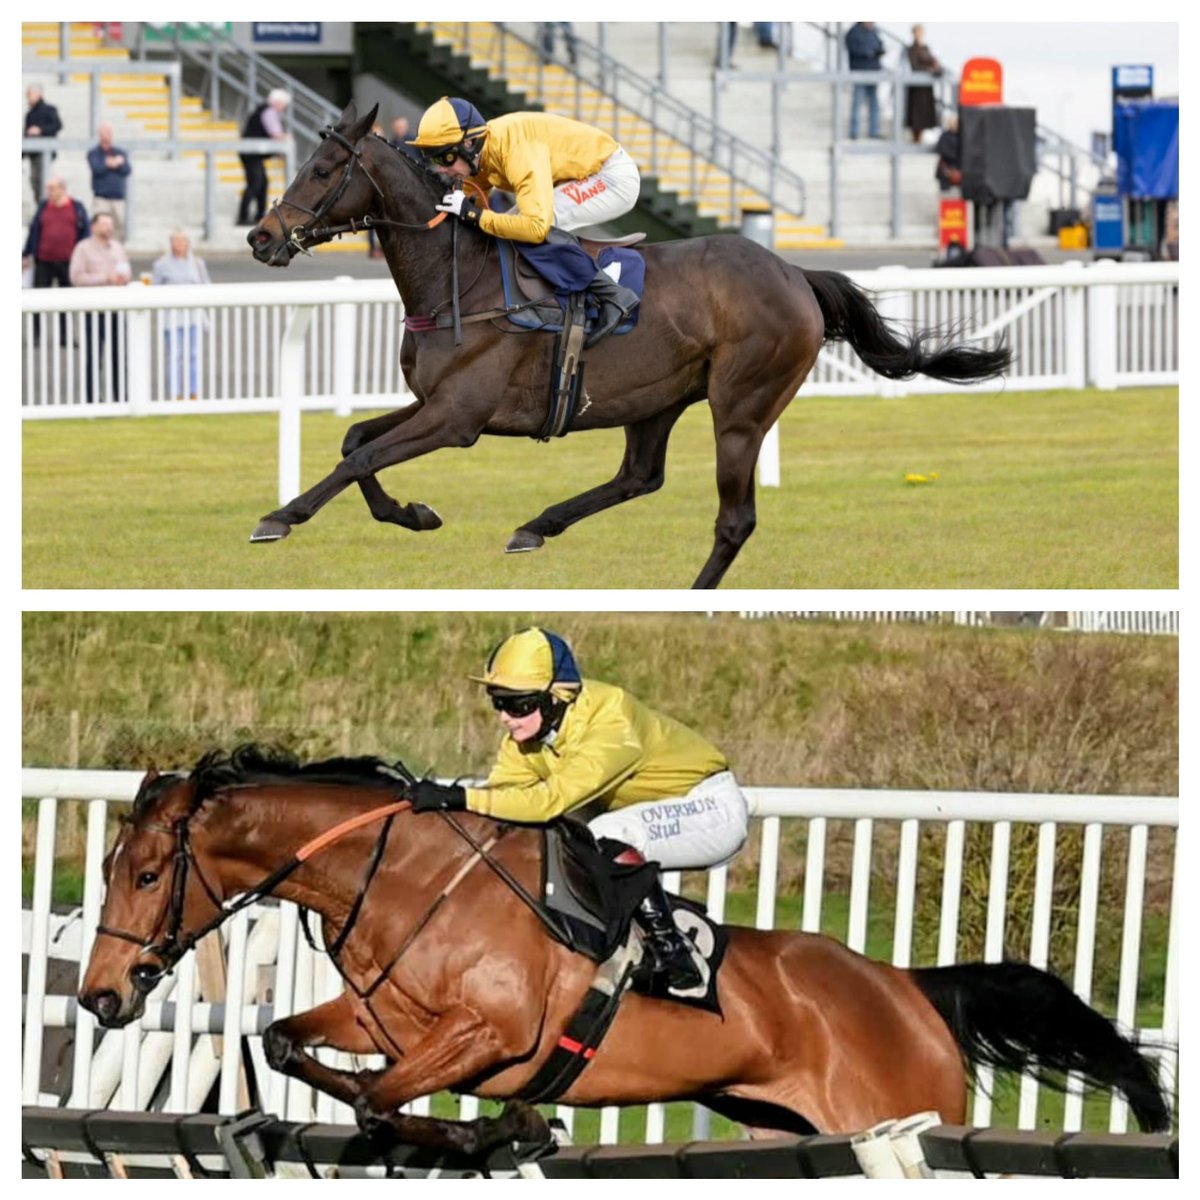 🔵🟡Richard Johnson Racing 🟡🔵 Delighted with are first season 🏇 With are 2 horses Party Vibes & Imperial Saint. 💥11 runners 💥4 winners We are sourcing new horses for next season Get in touch to get involved 📧richardjohnsonracing@gmail.com 📞 07885765361